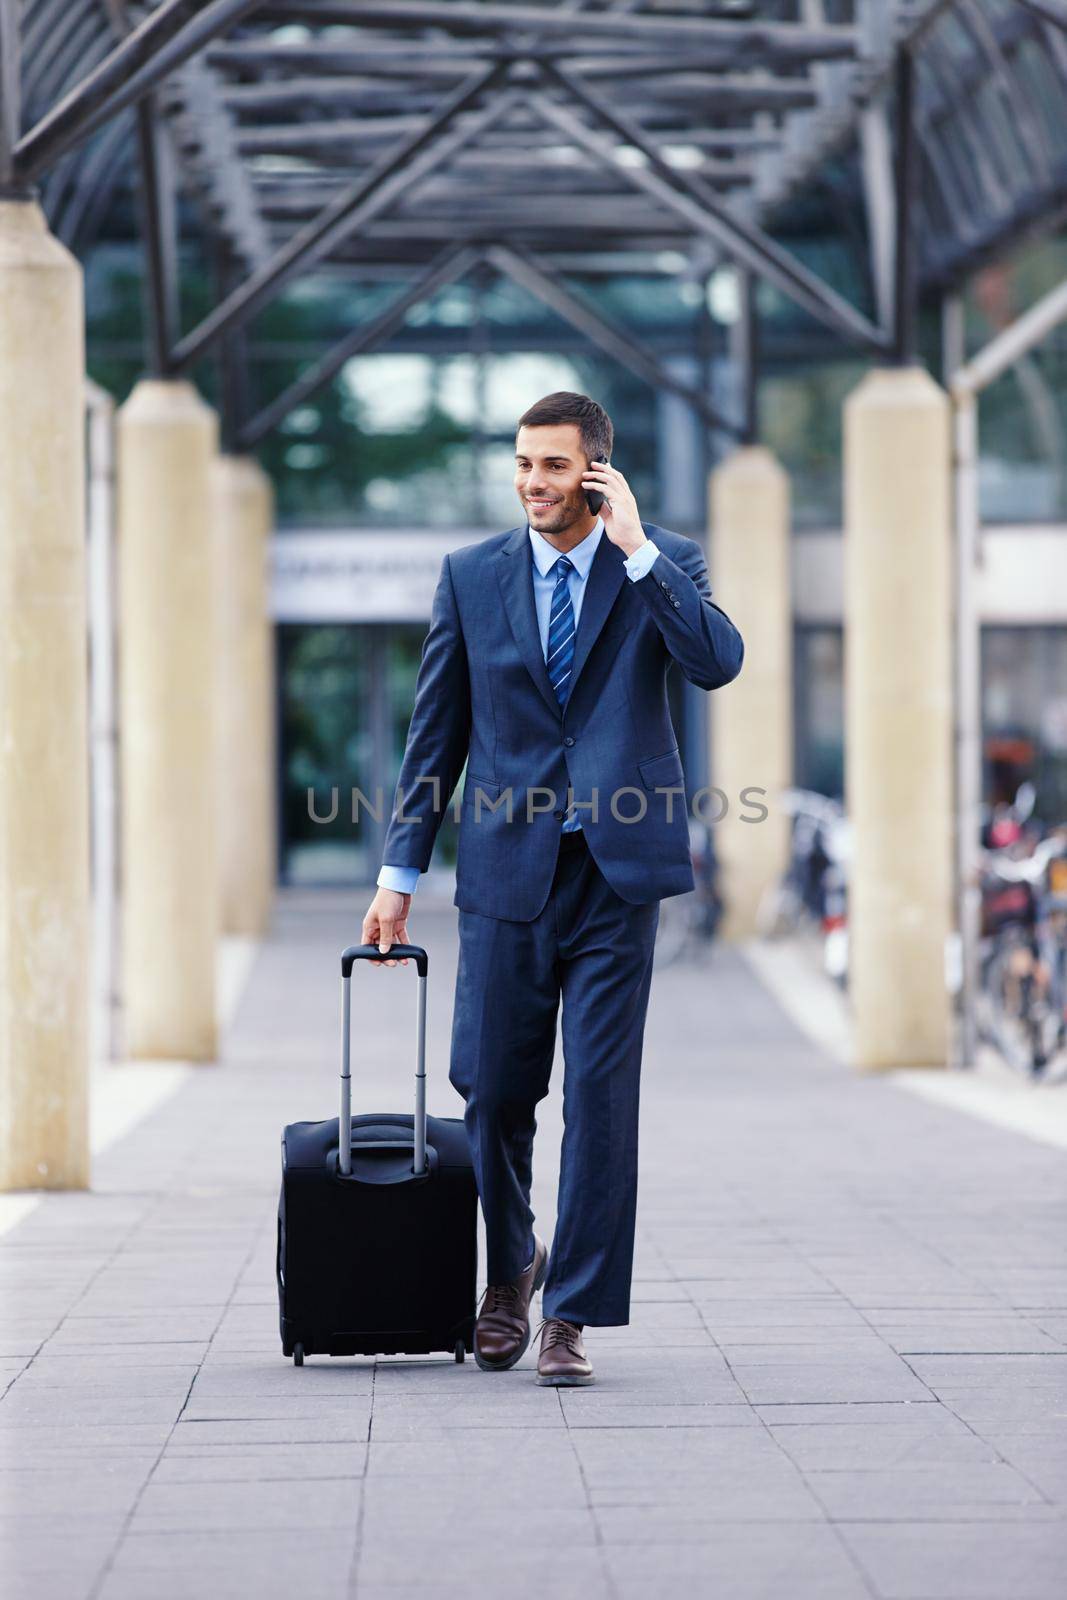 Business communication as he commutes...A handsome young businessman on his mobile while walking into the airport with his luggage